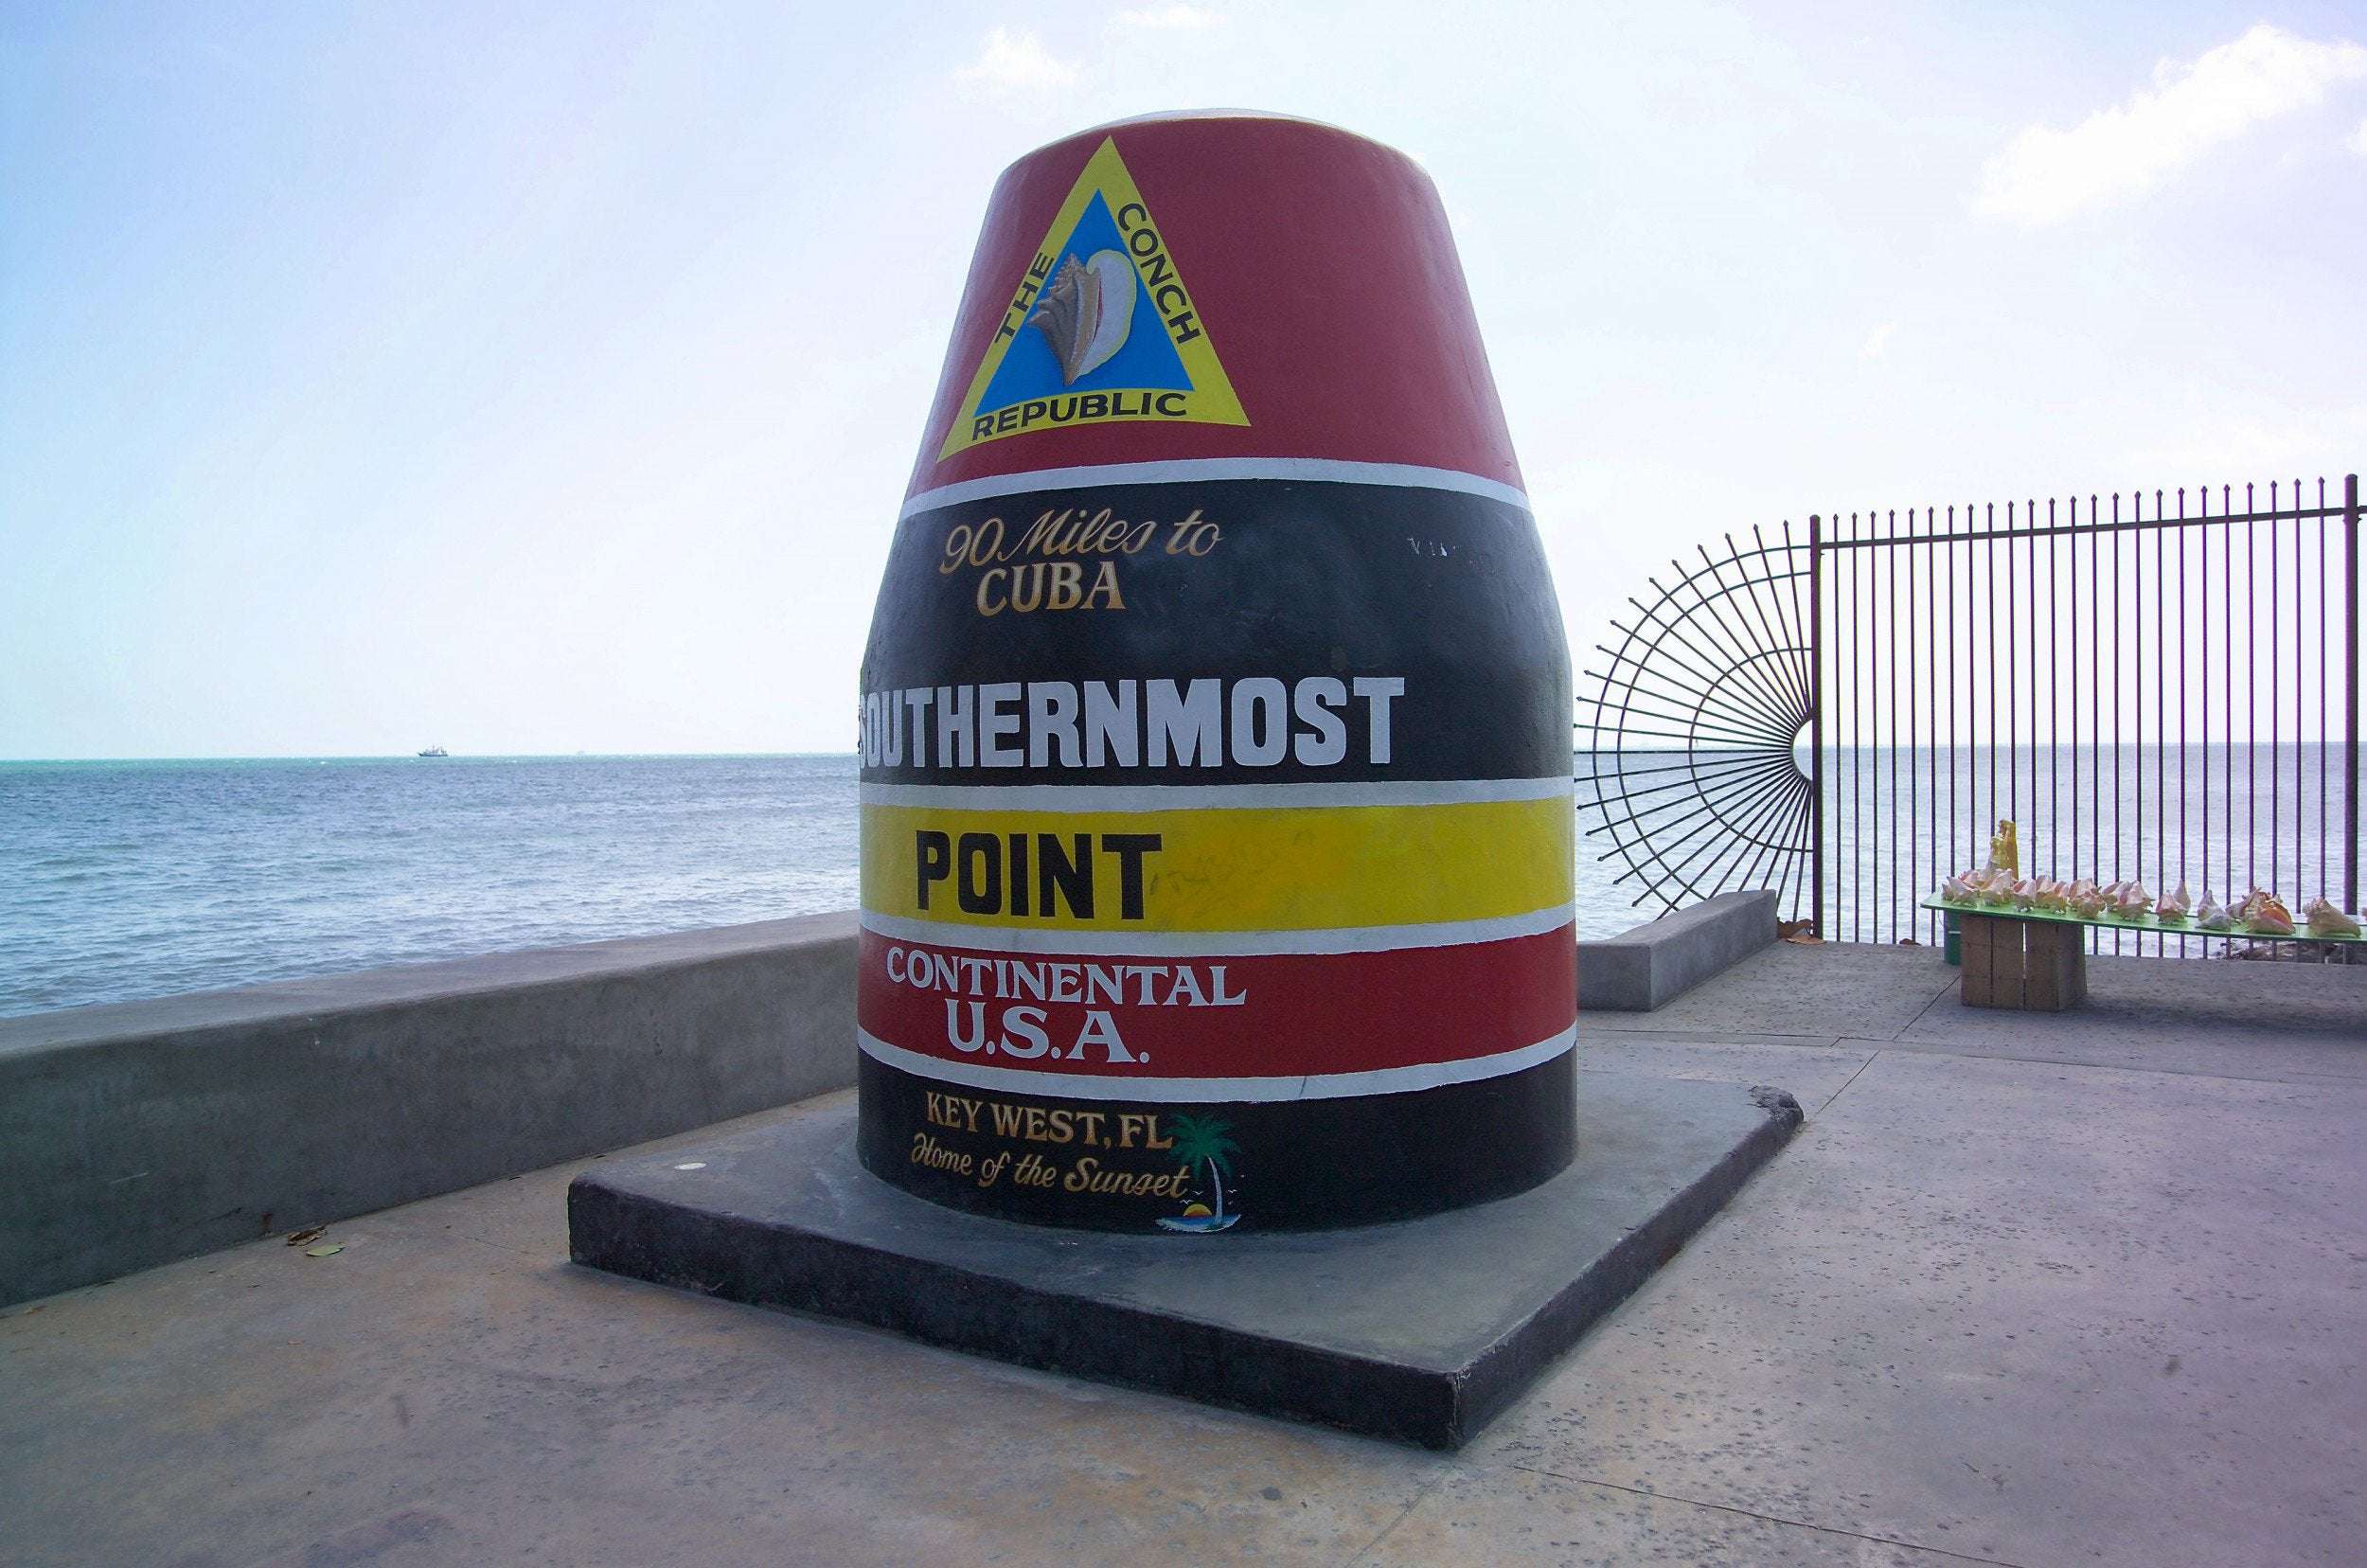 image for Man's Failure to Tip Bartender Leads to His Arrest in Burning of Key West Landmark